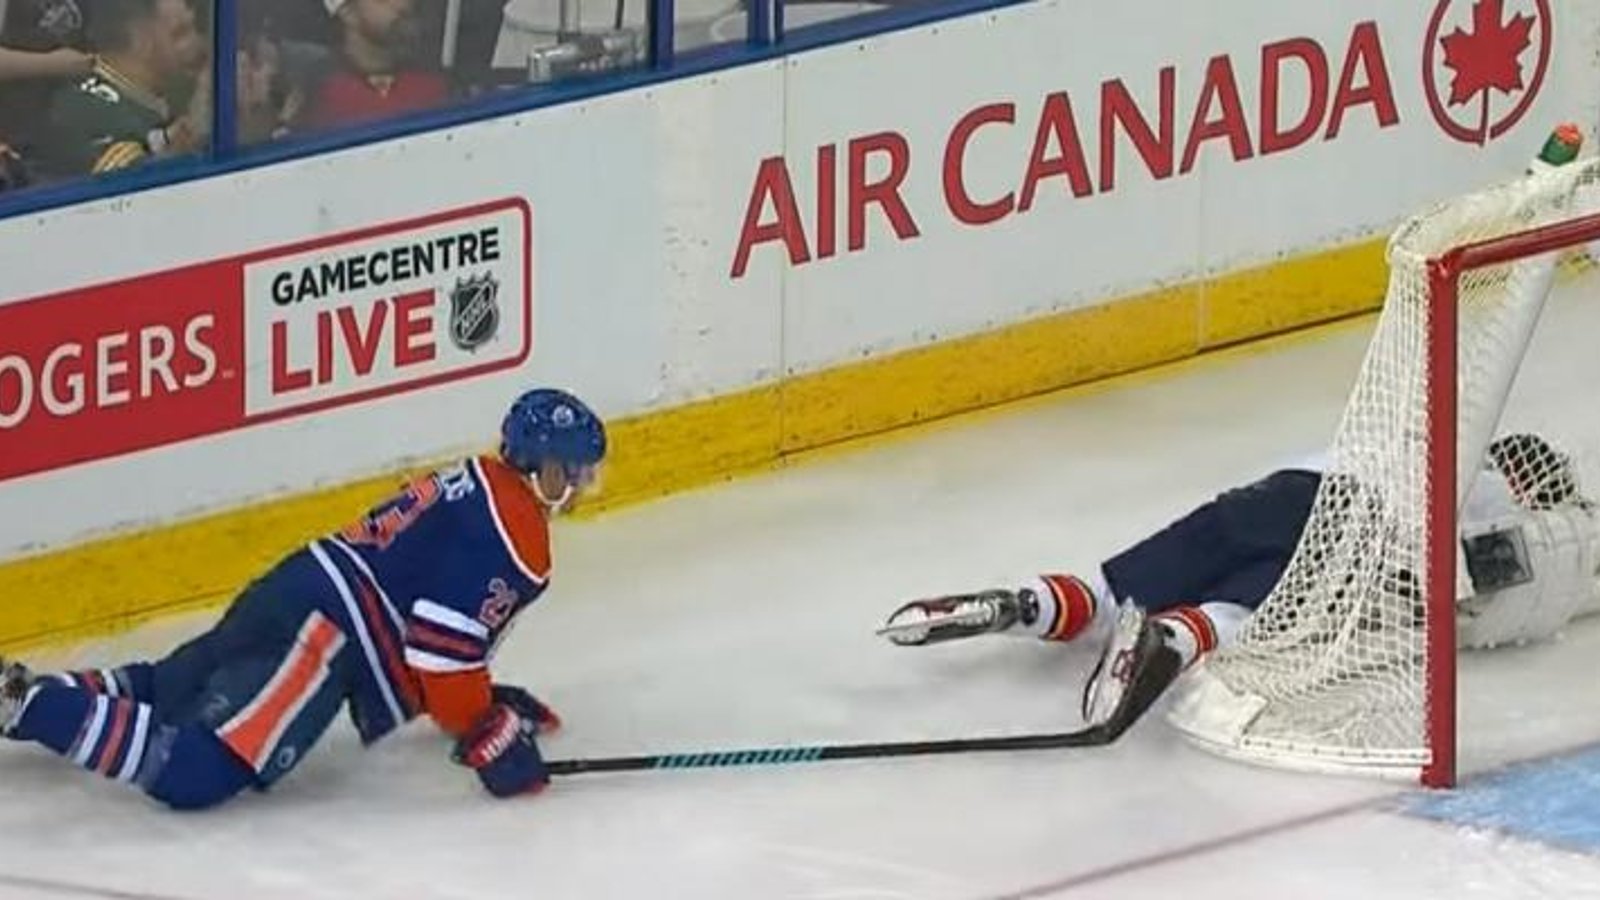 NHL announces discipline for Hendricks after dirty hit on franchise player.